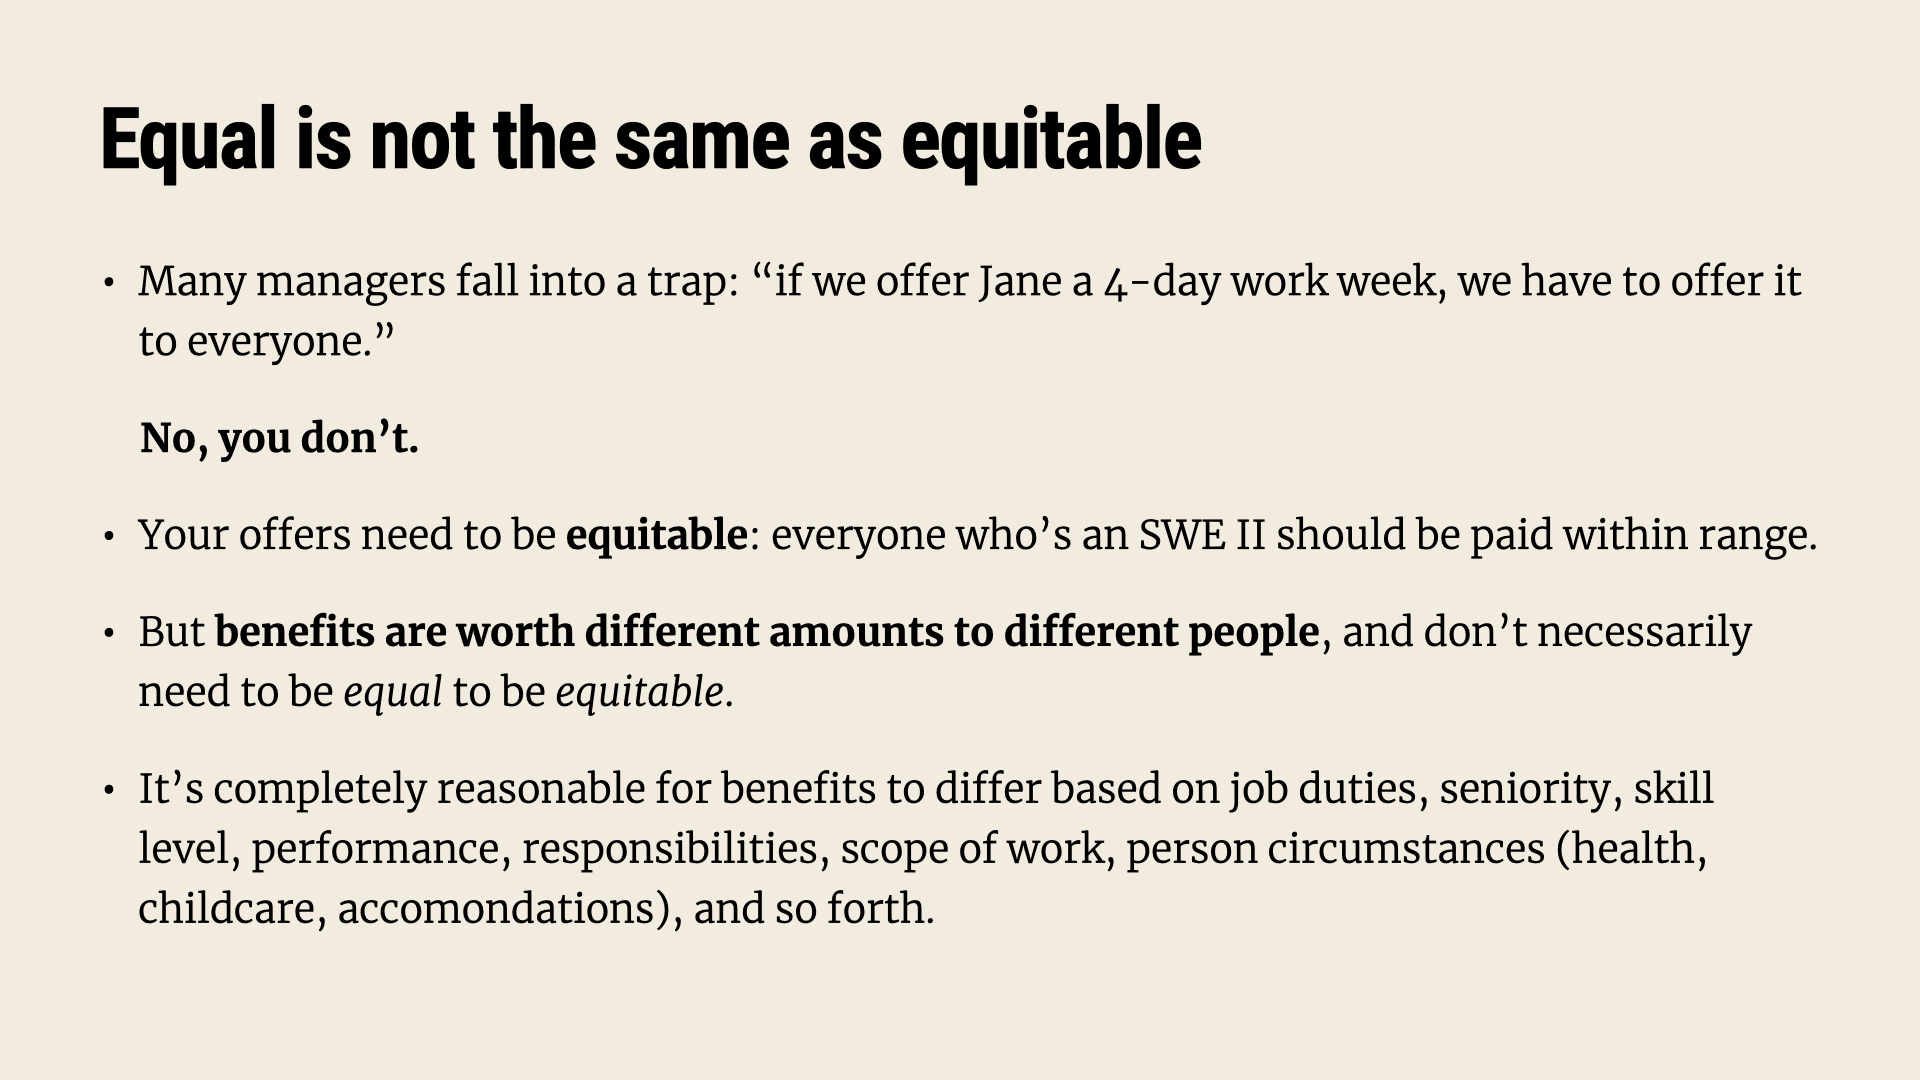 Equal is not the same as equitable